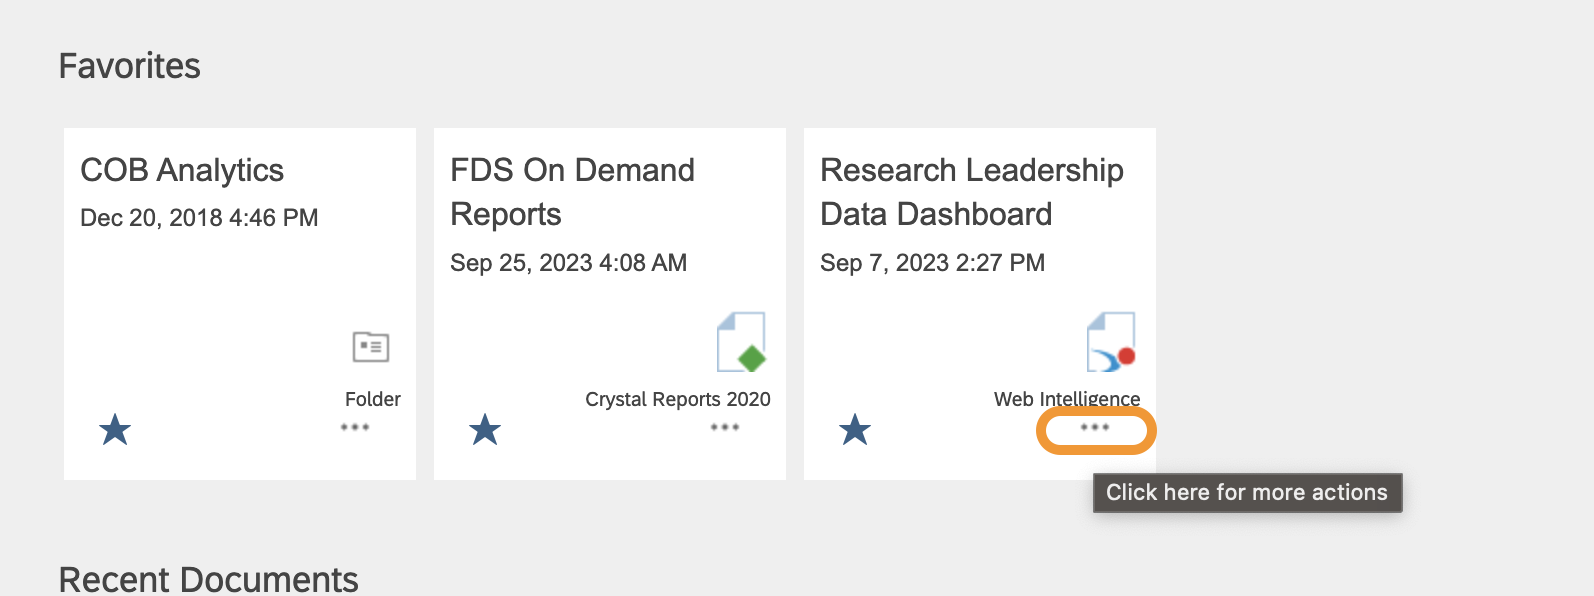 View of the "Favorites" section of the BI Launch Pad homepage, with the three dots at the bottom of the Research Leadership Data Dashboard circled.